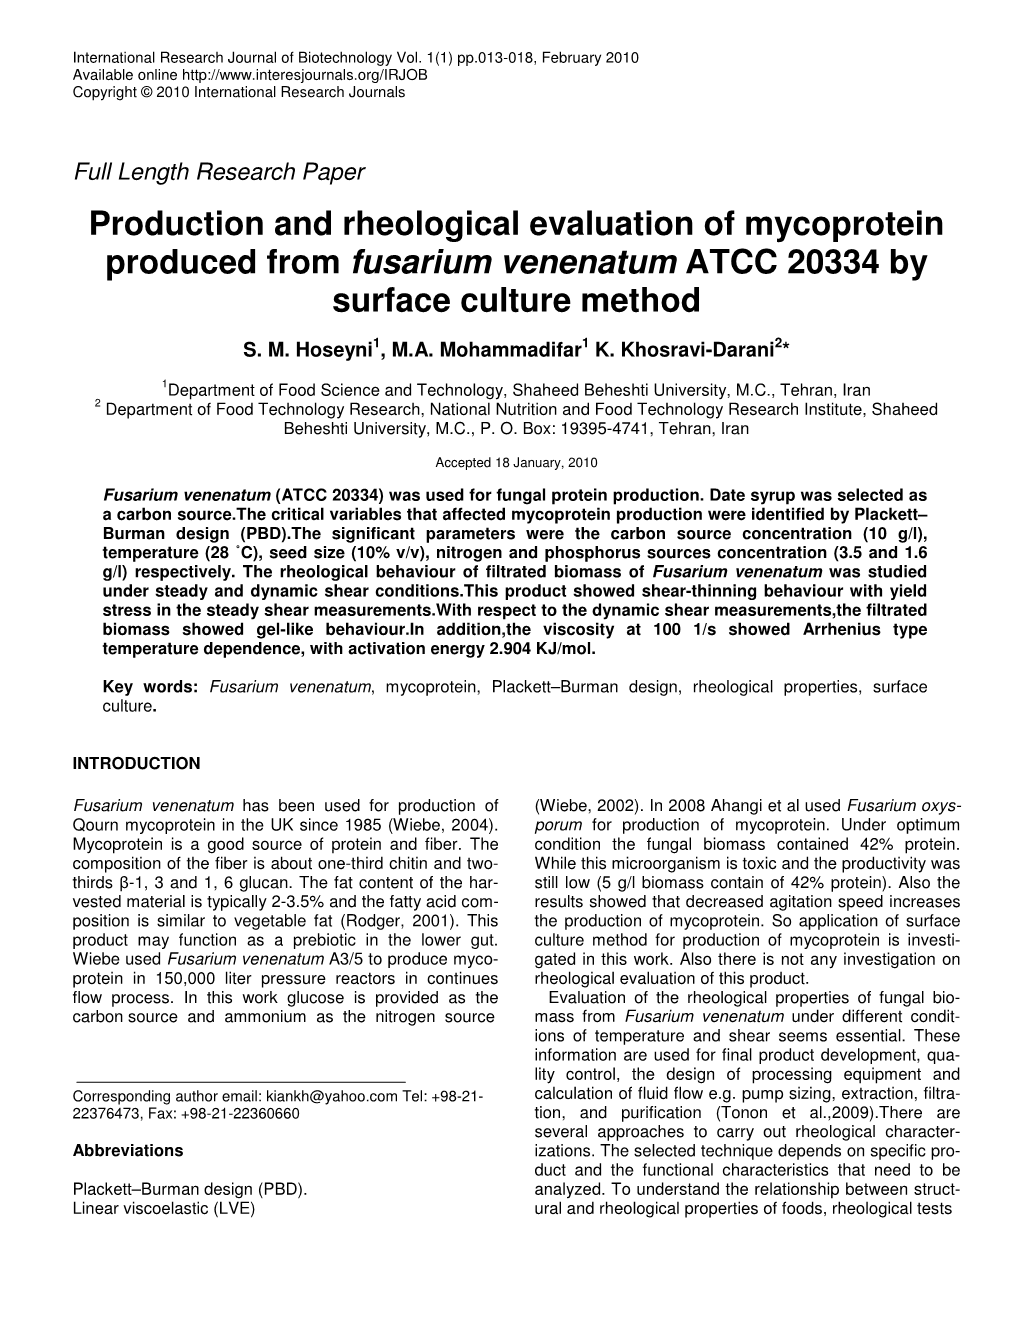 Production and Rheological Evaluation of Mycoprotein Produced from Fusarium Venenatum ATCC 20334 by Surface Culture Method